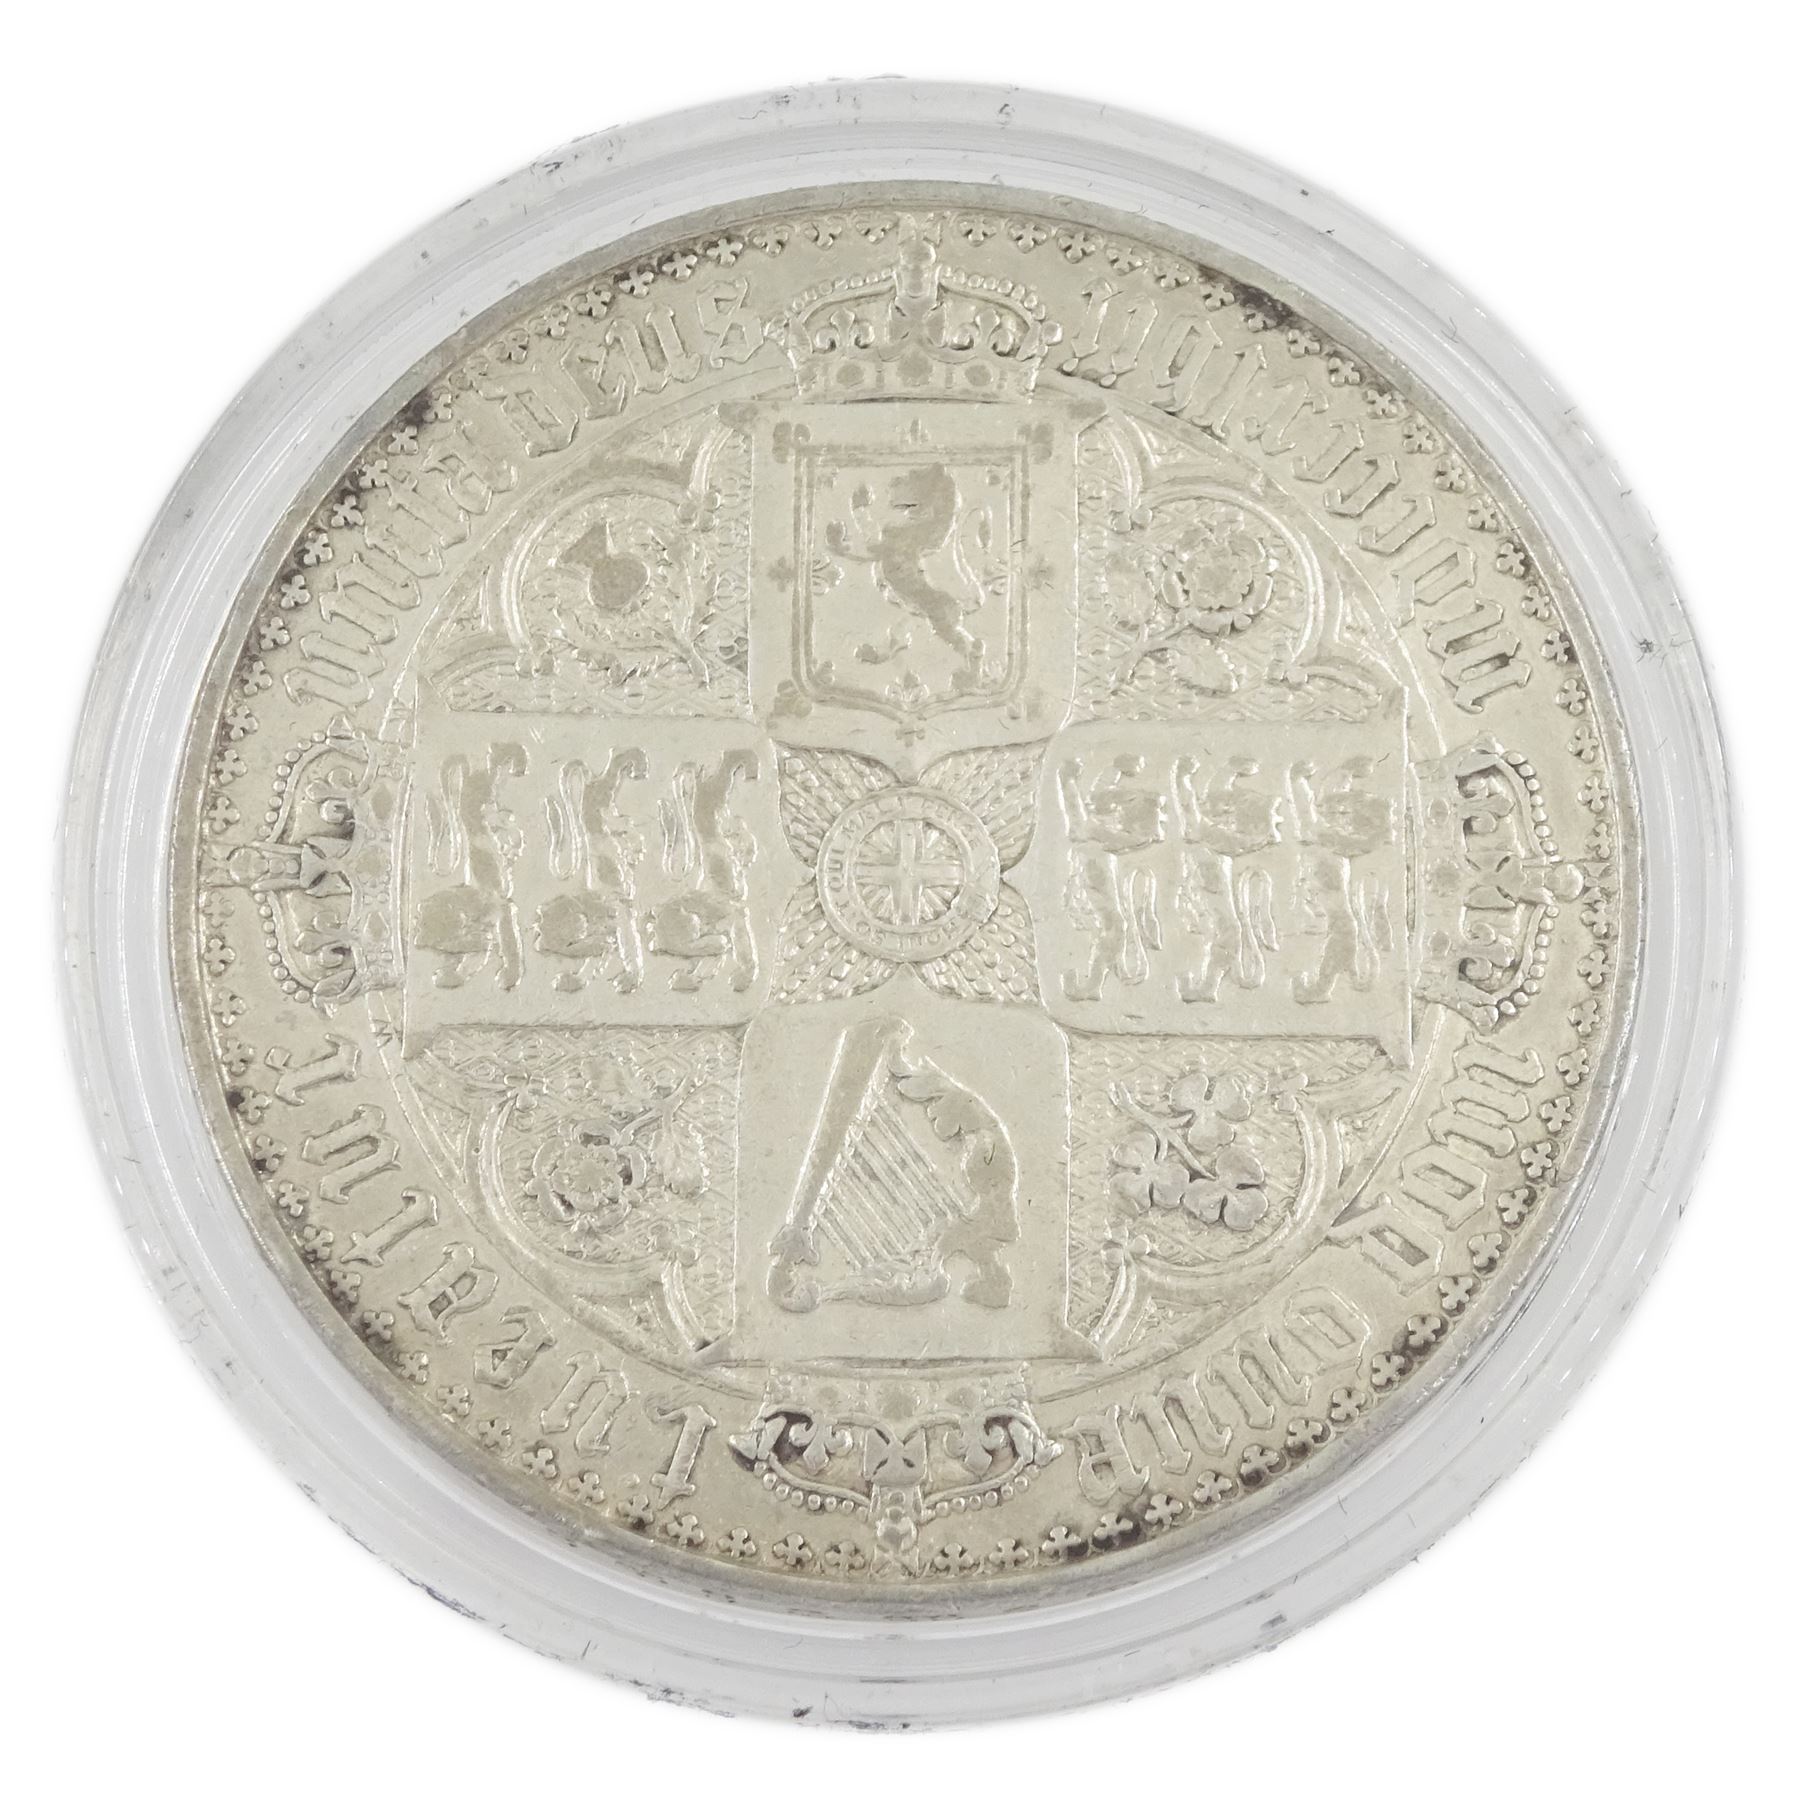 Queen Victoria 1847 Gothic crown coin - Image 2 of 3